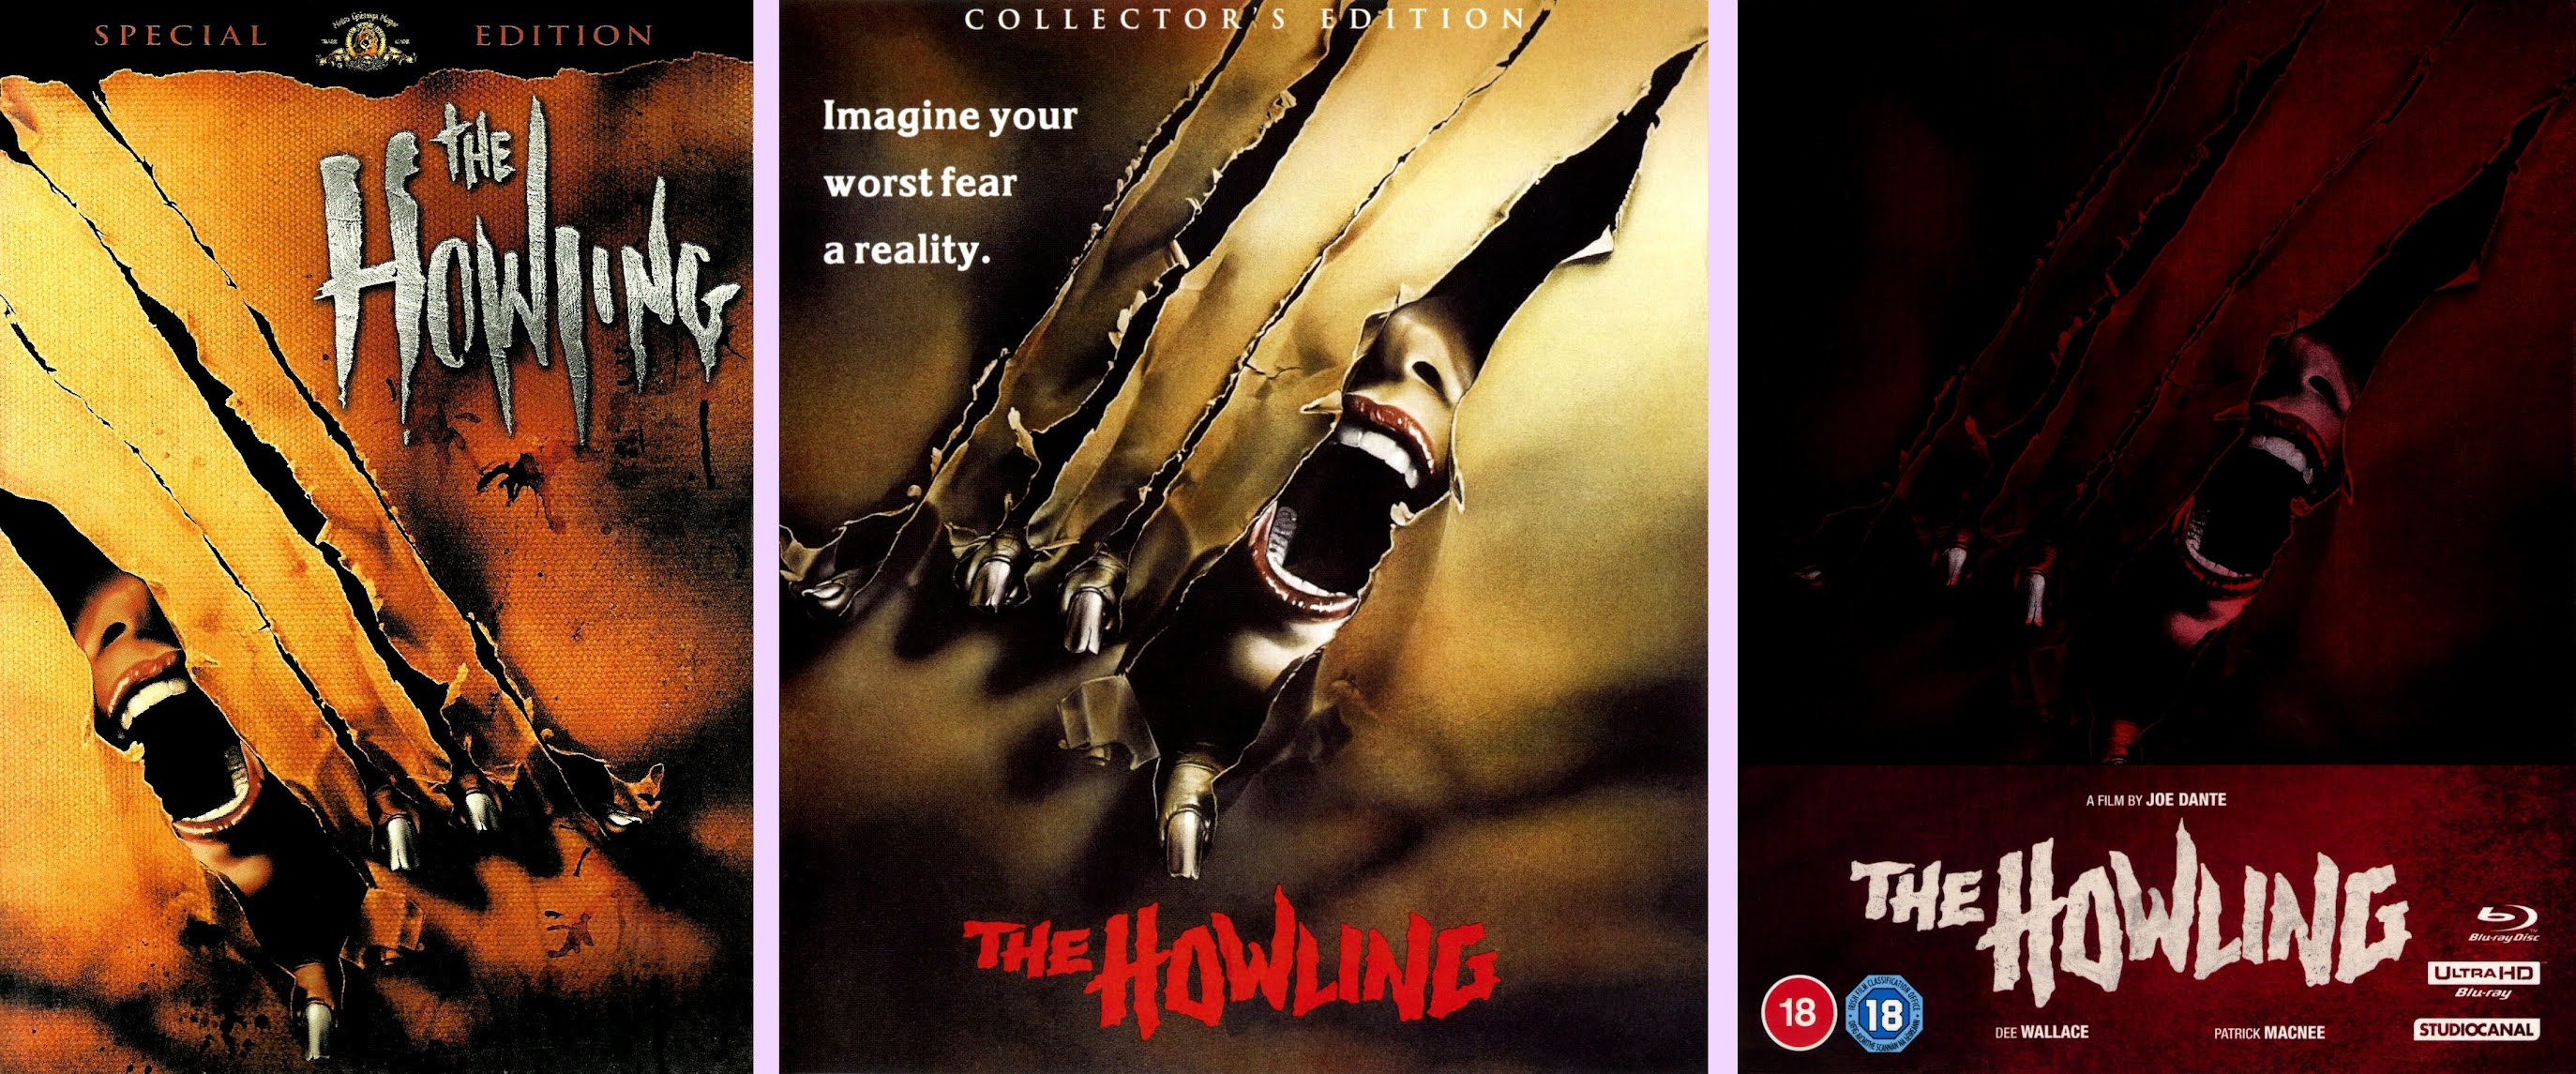 DVD Exotica: The Howling: Restored